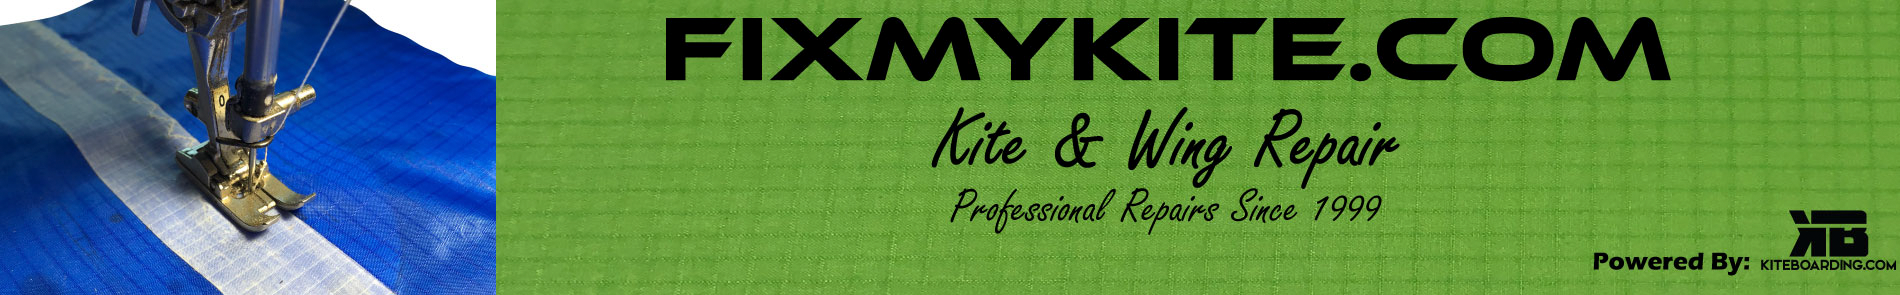 FixMyKite 9mm Inflate valve NEW - standard size for most kites 